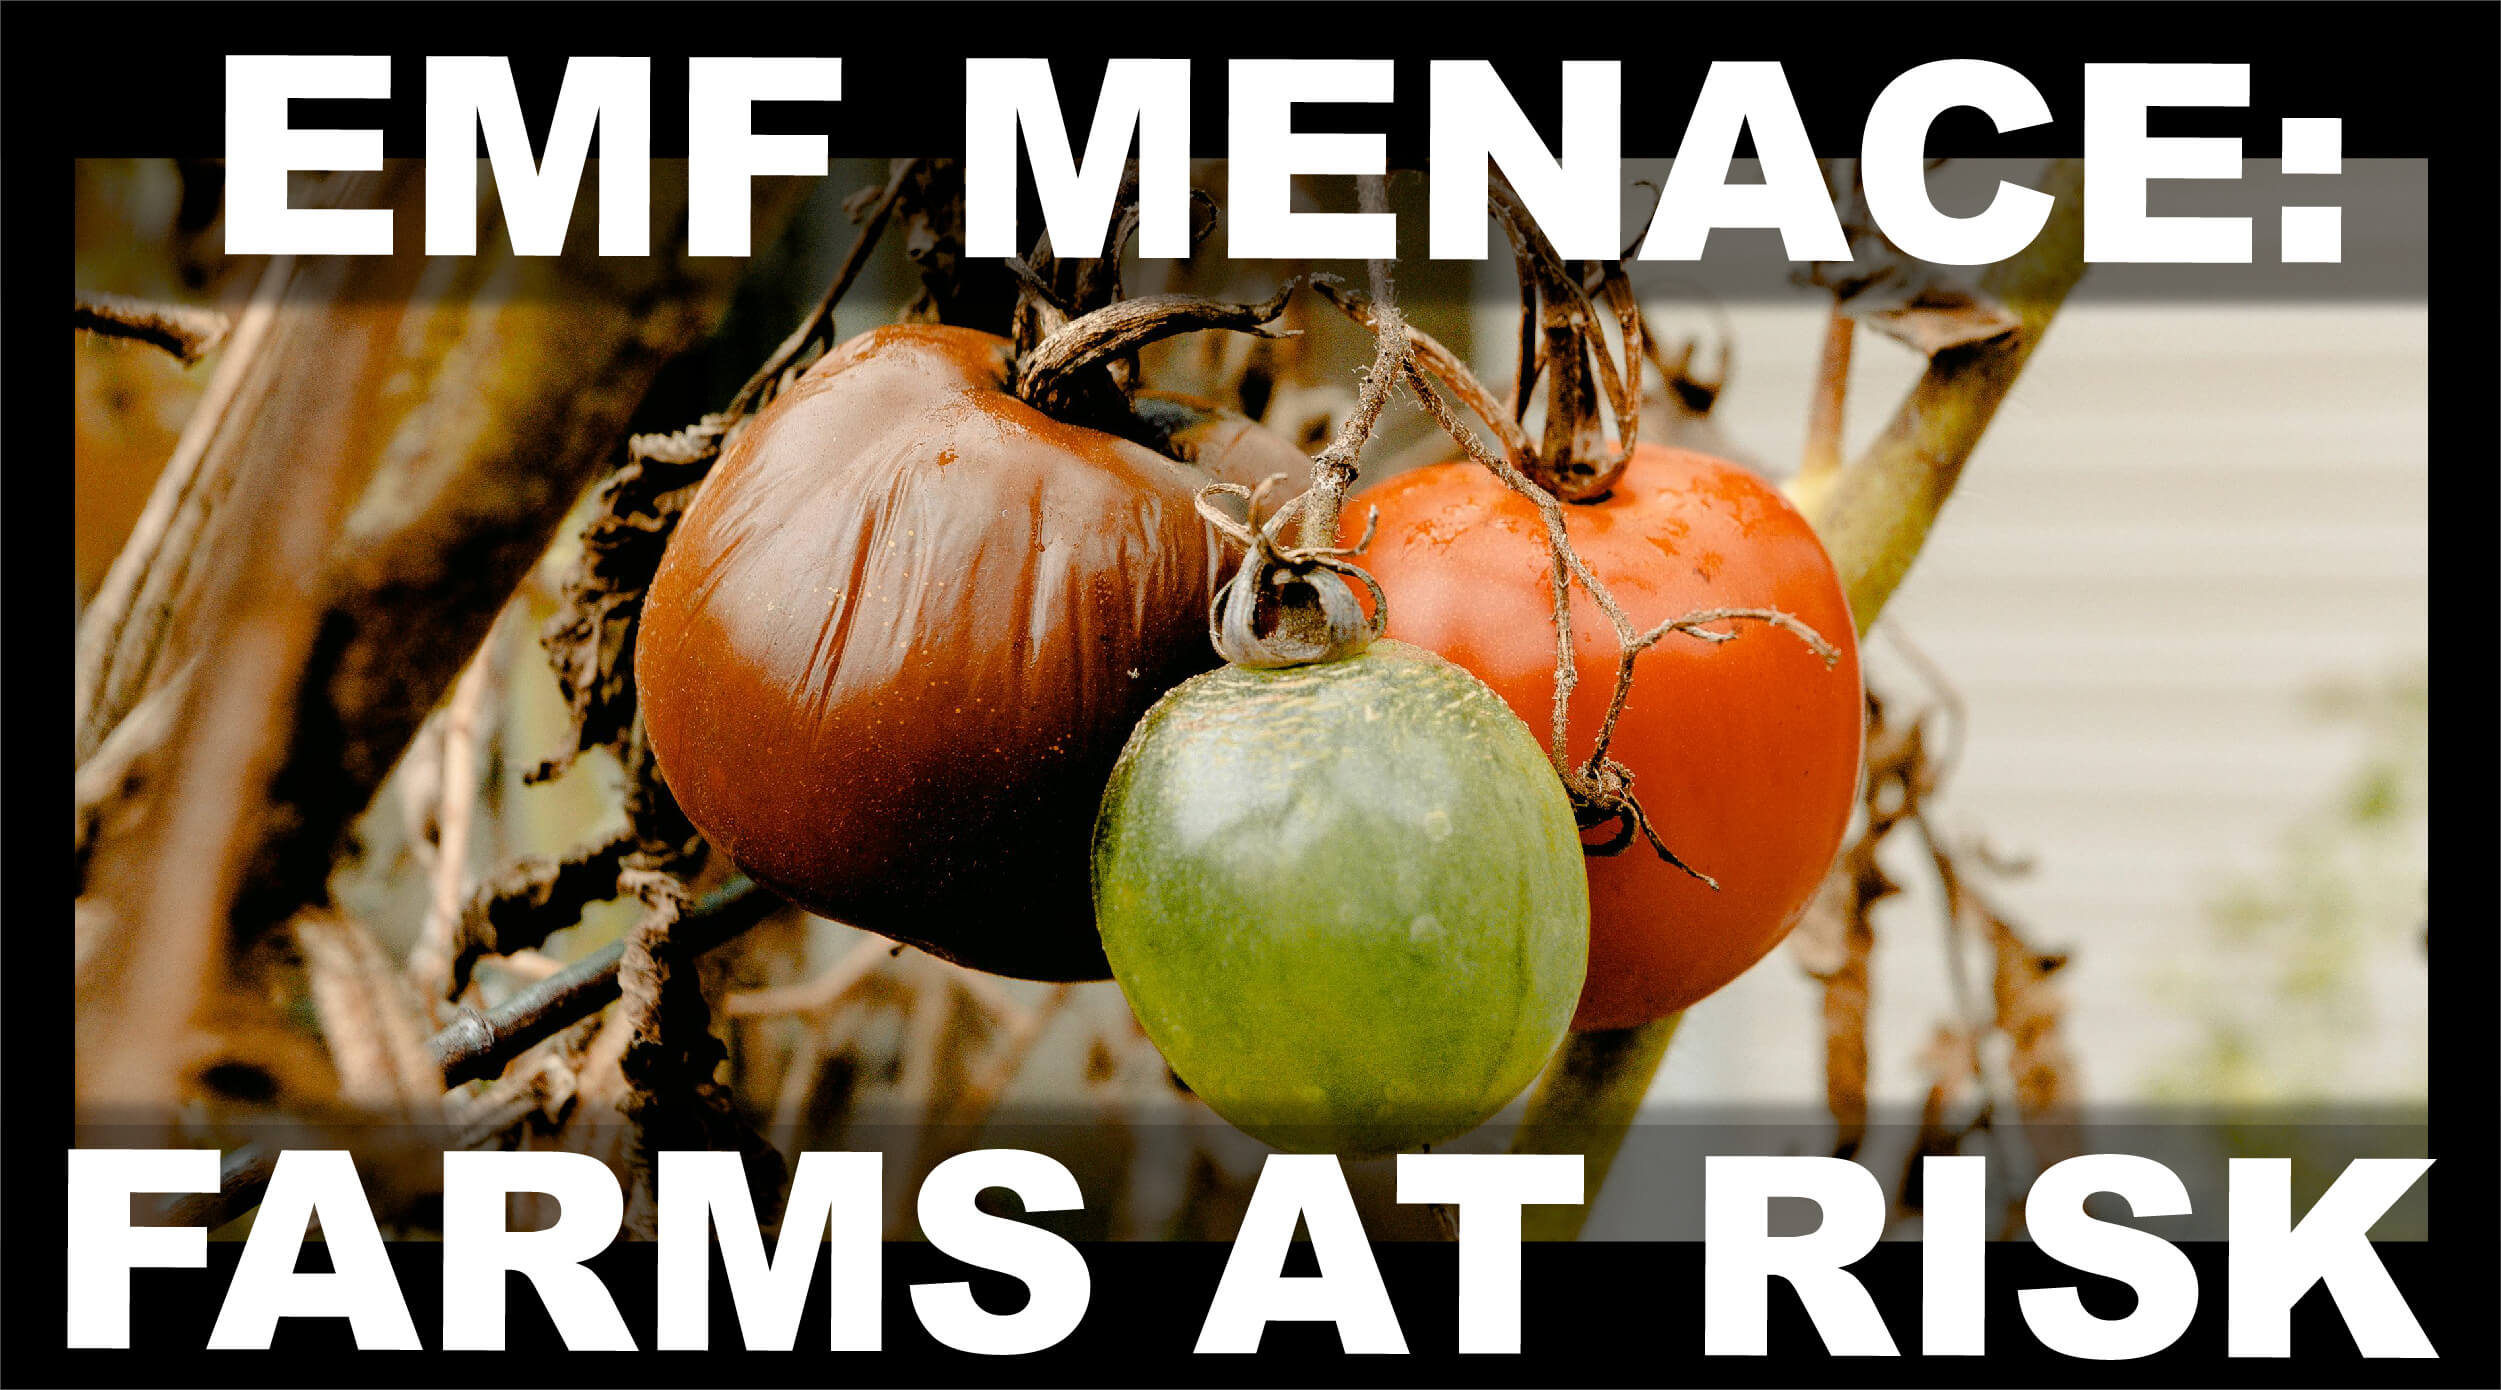 a group of rotten tomatoes, showcasing the effects of EMF stress on produce.